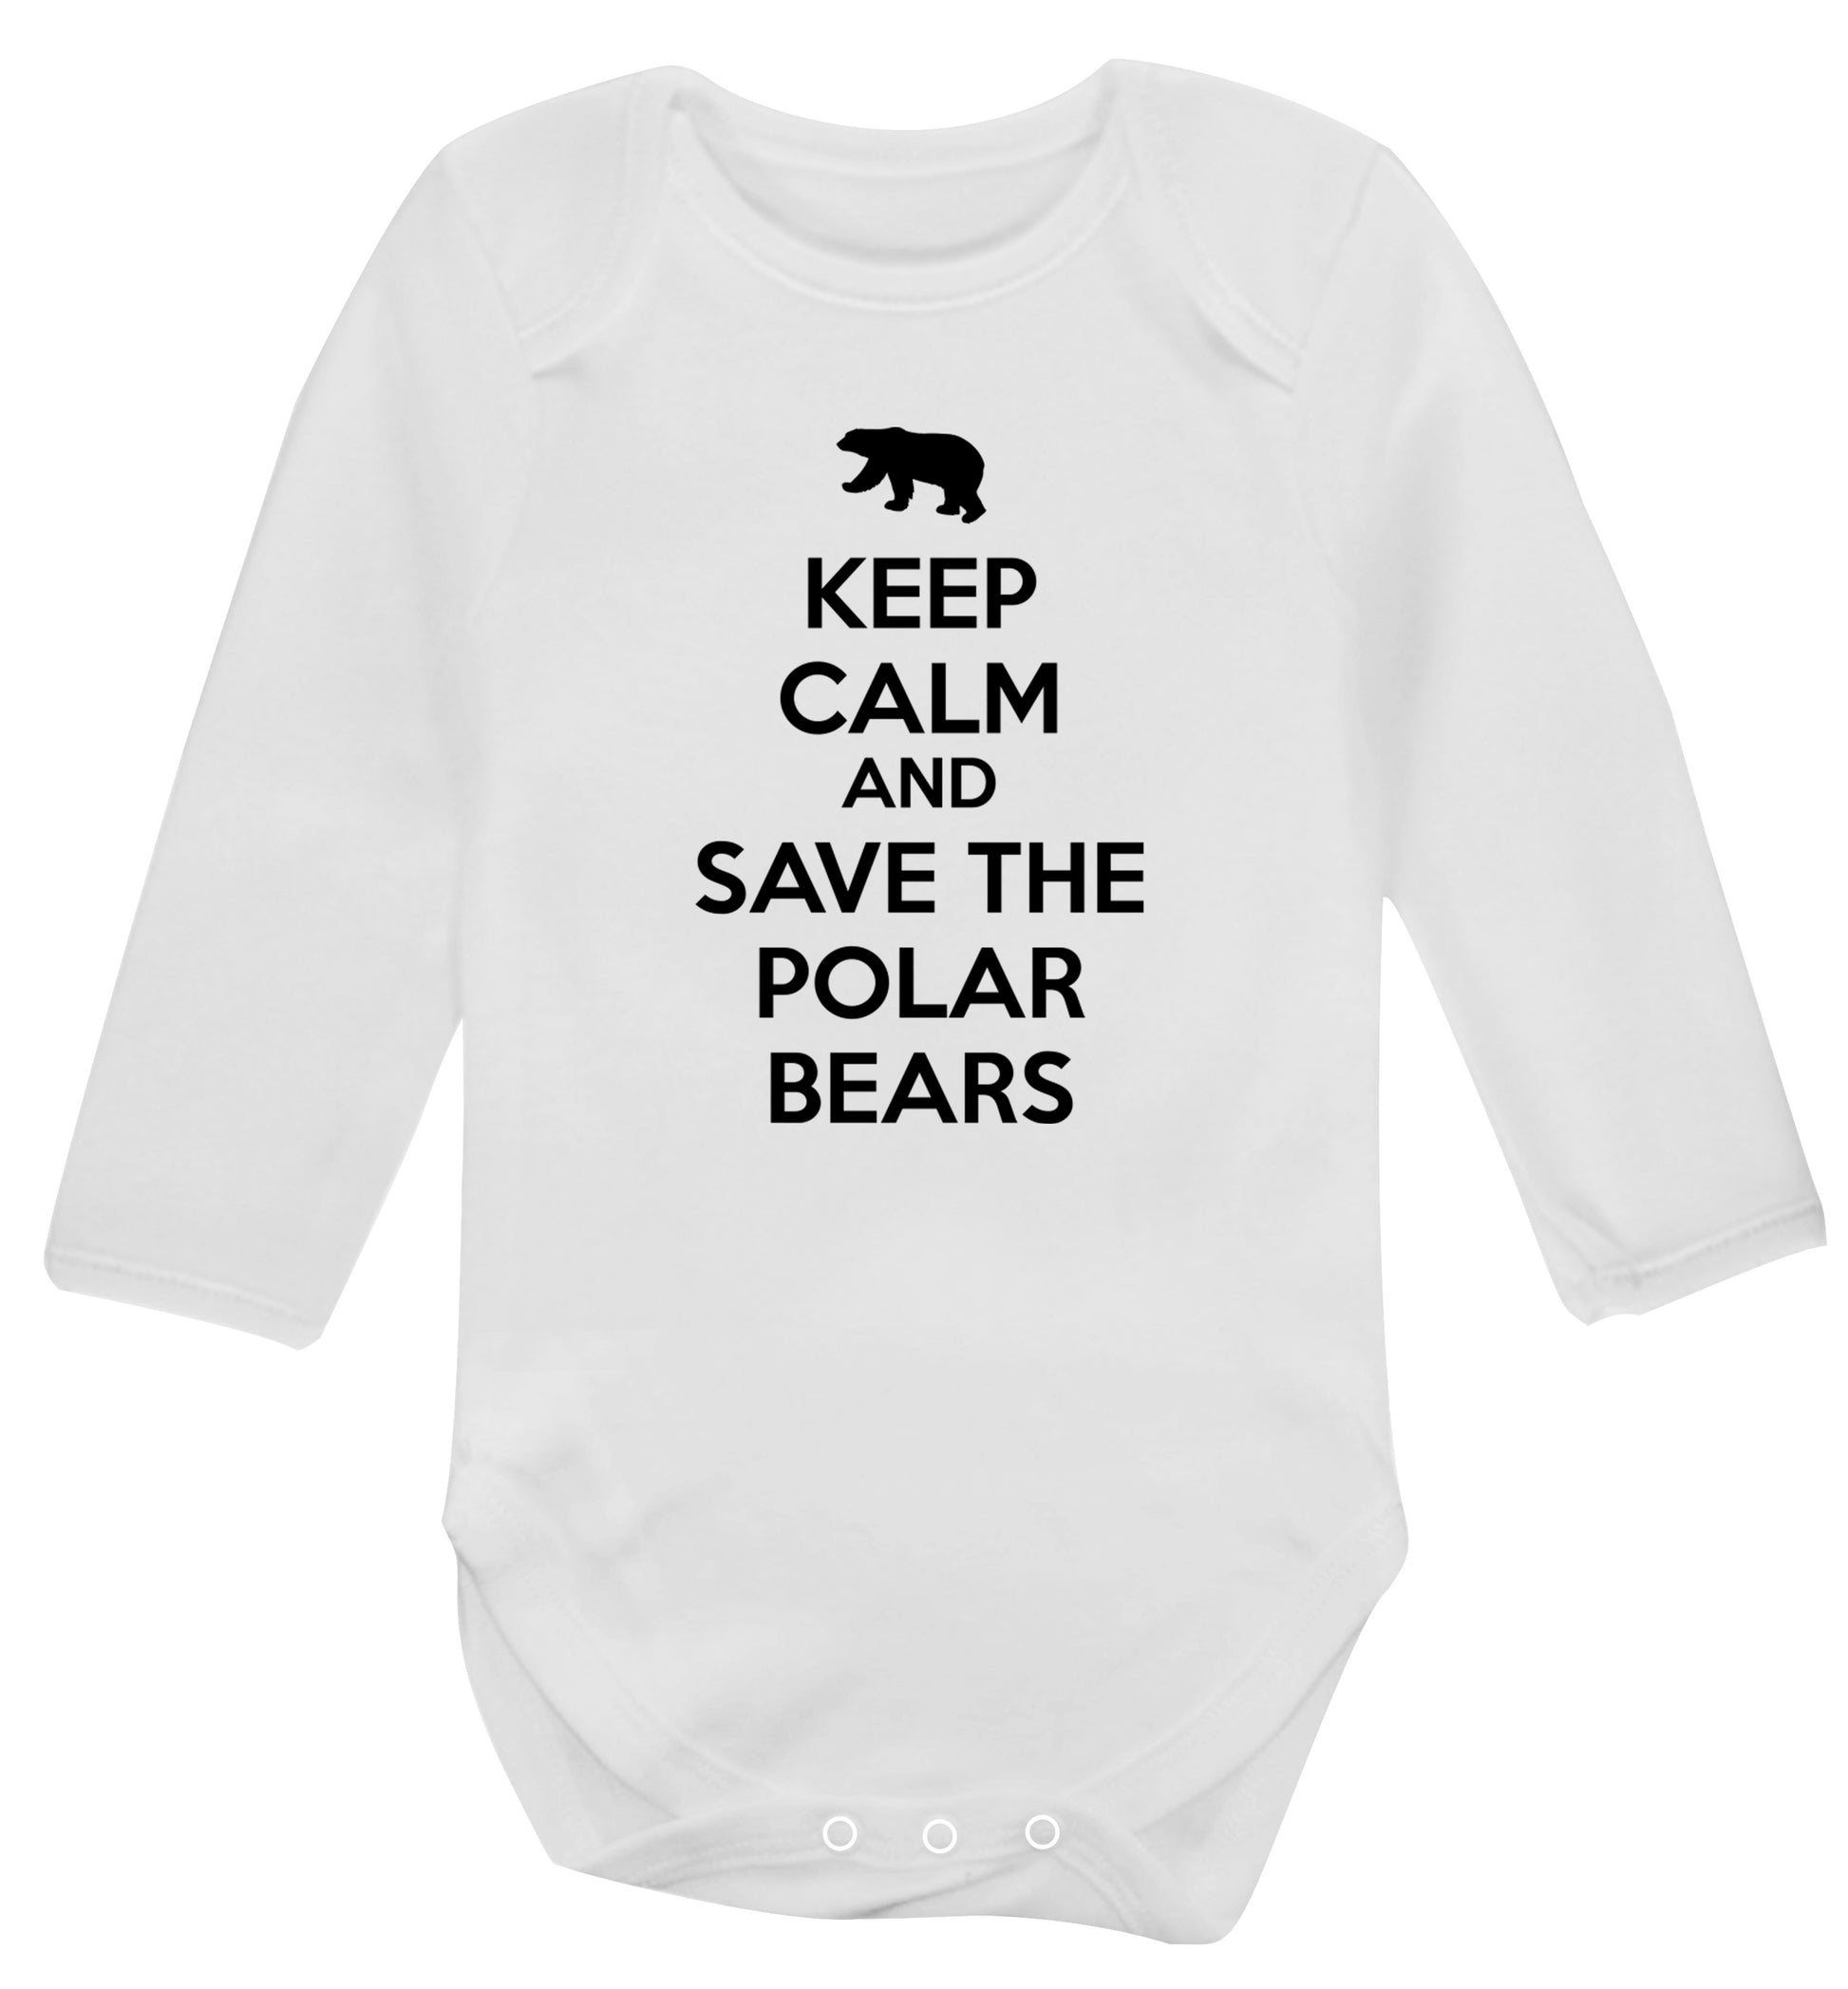 Keep calm and save the polar bears Baby Vest long sleeved white 6-12 months